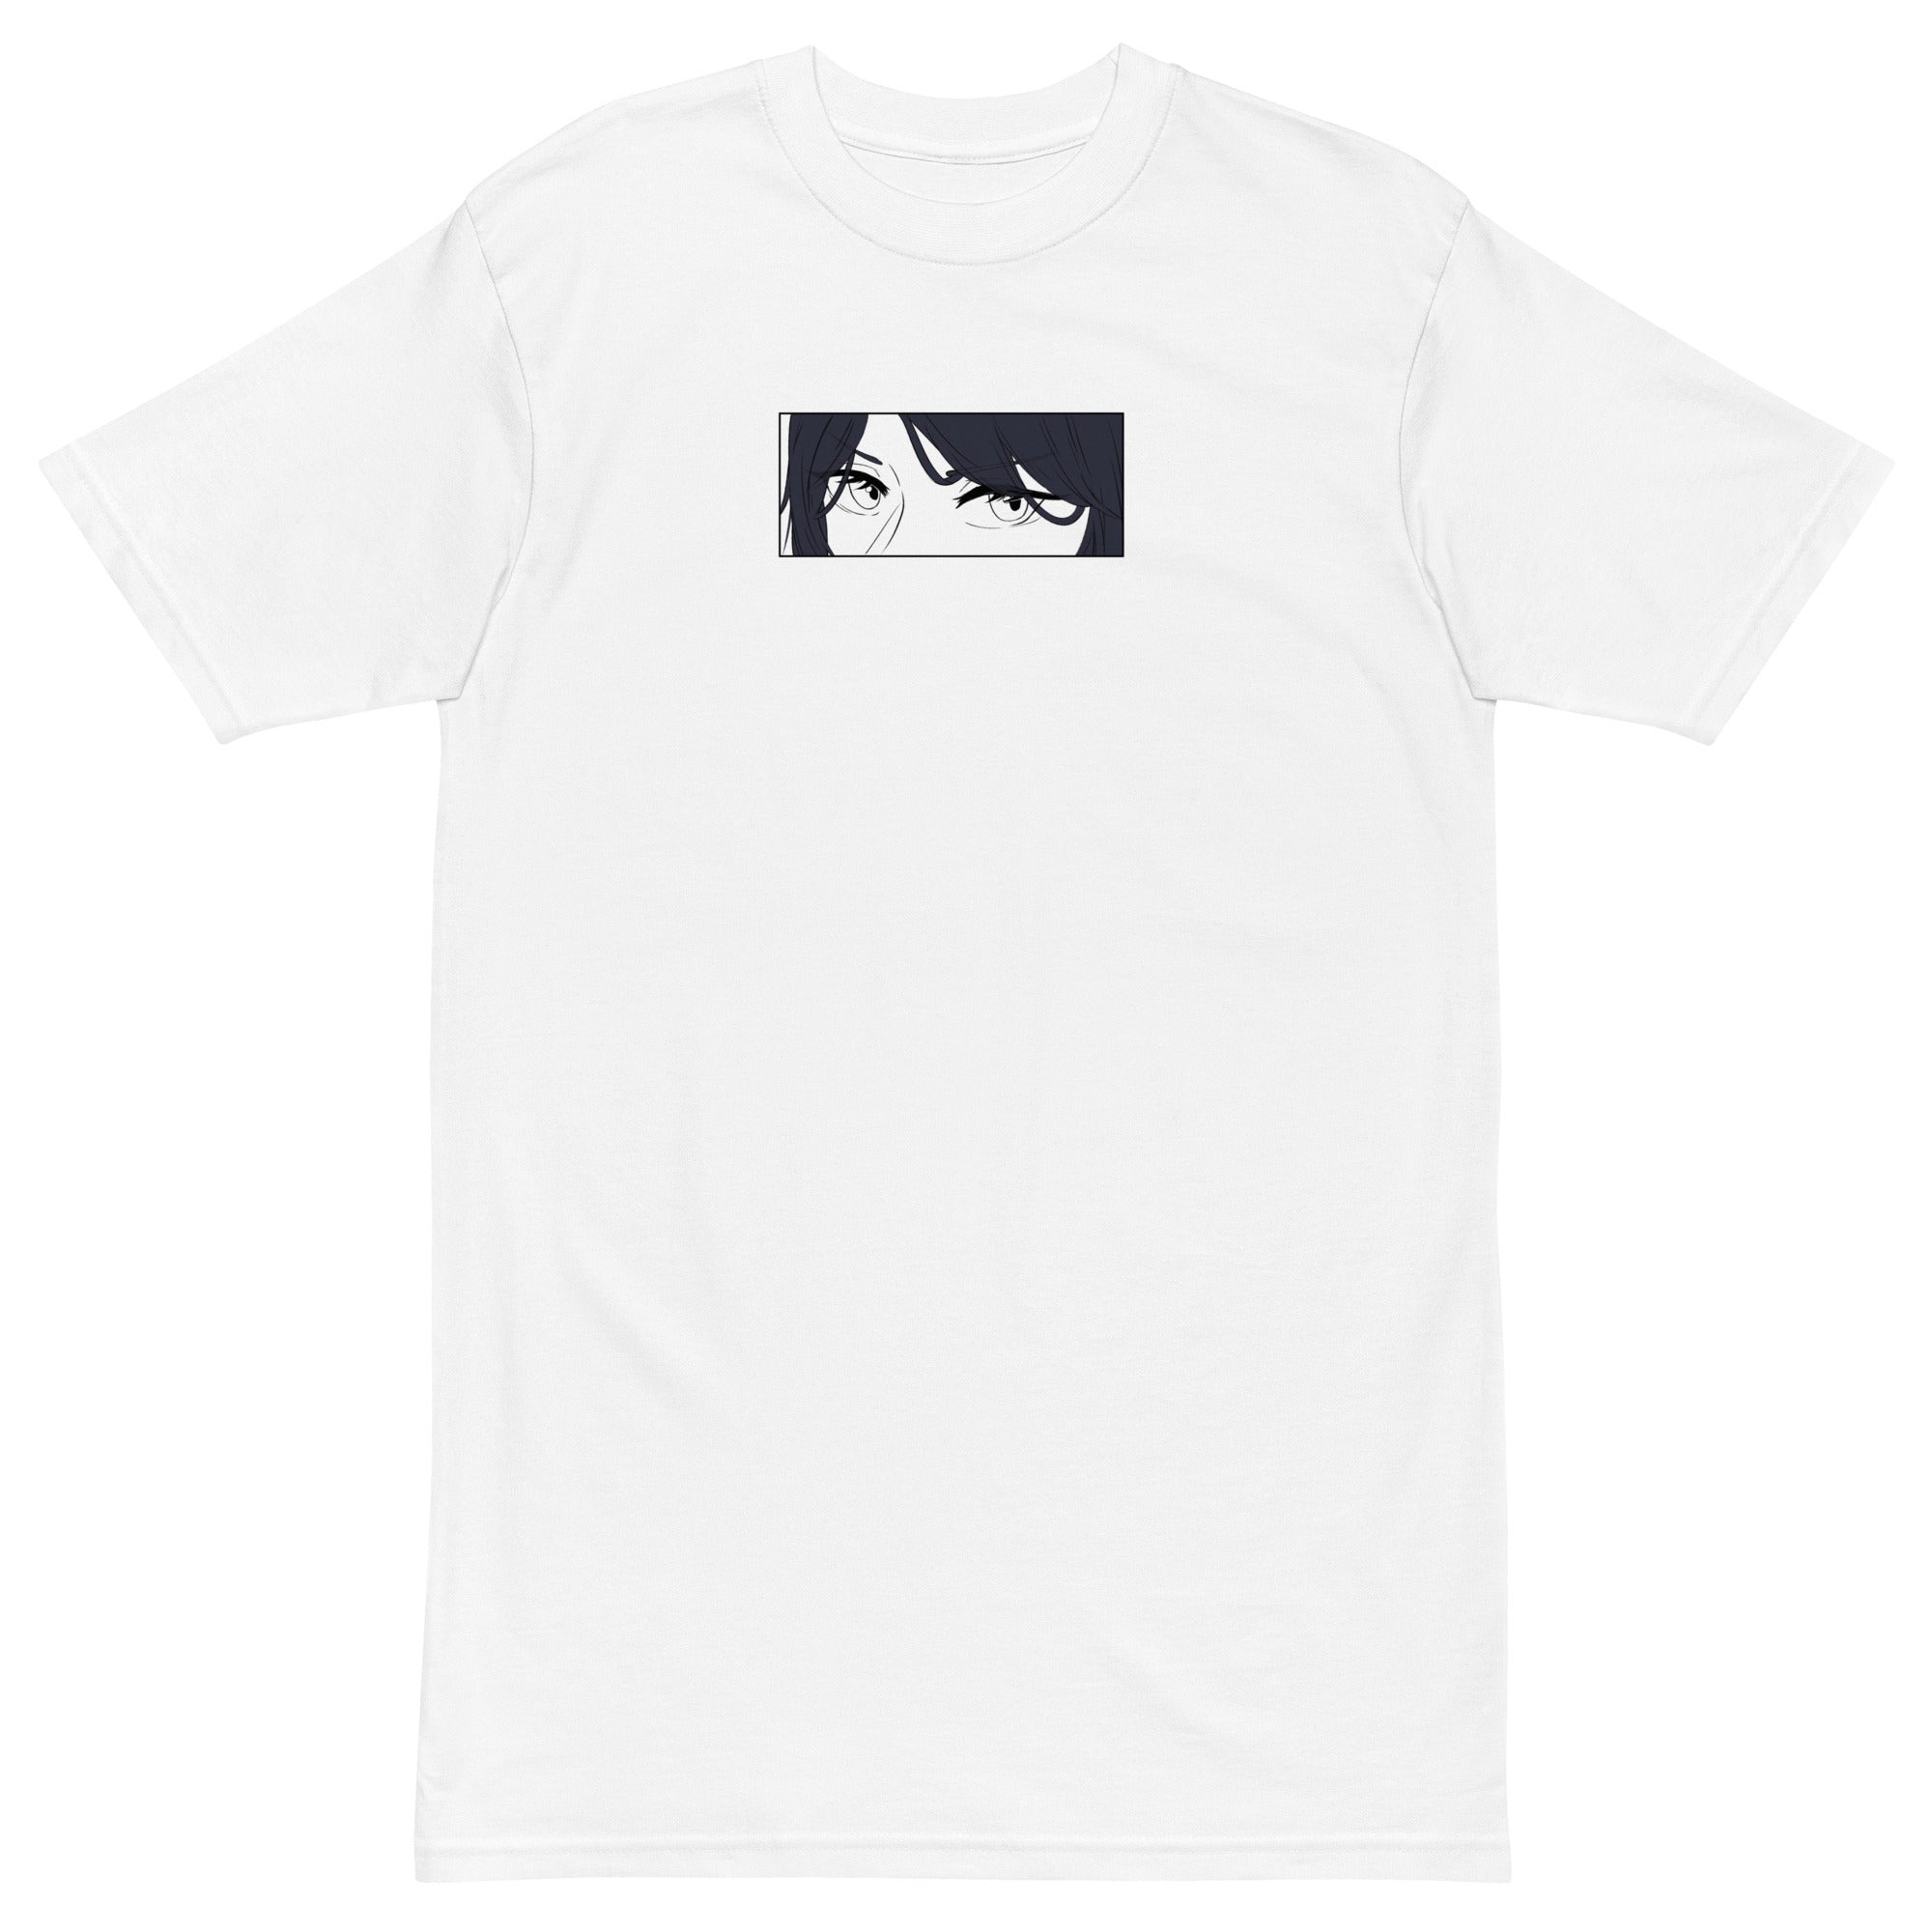 DISCONTENT • anime t-shirt - Jackler - anime-inspired streetwear - anime clothing